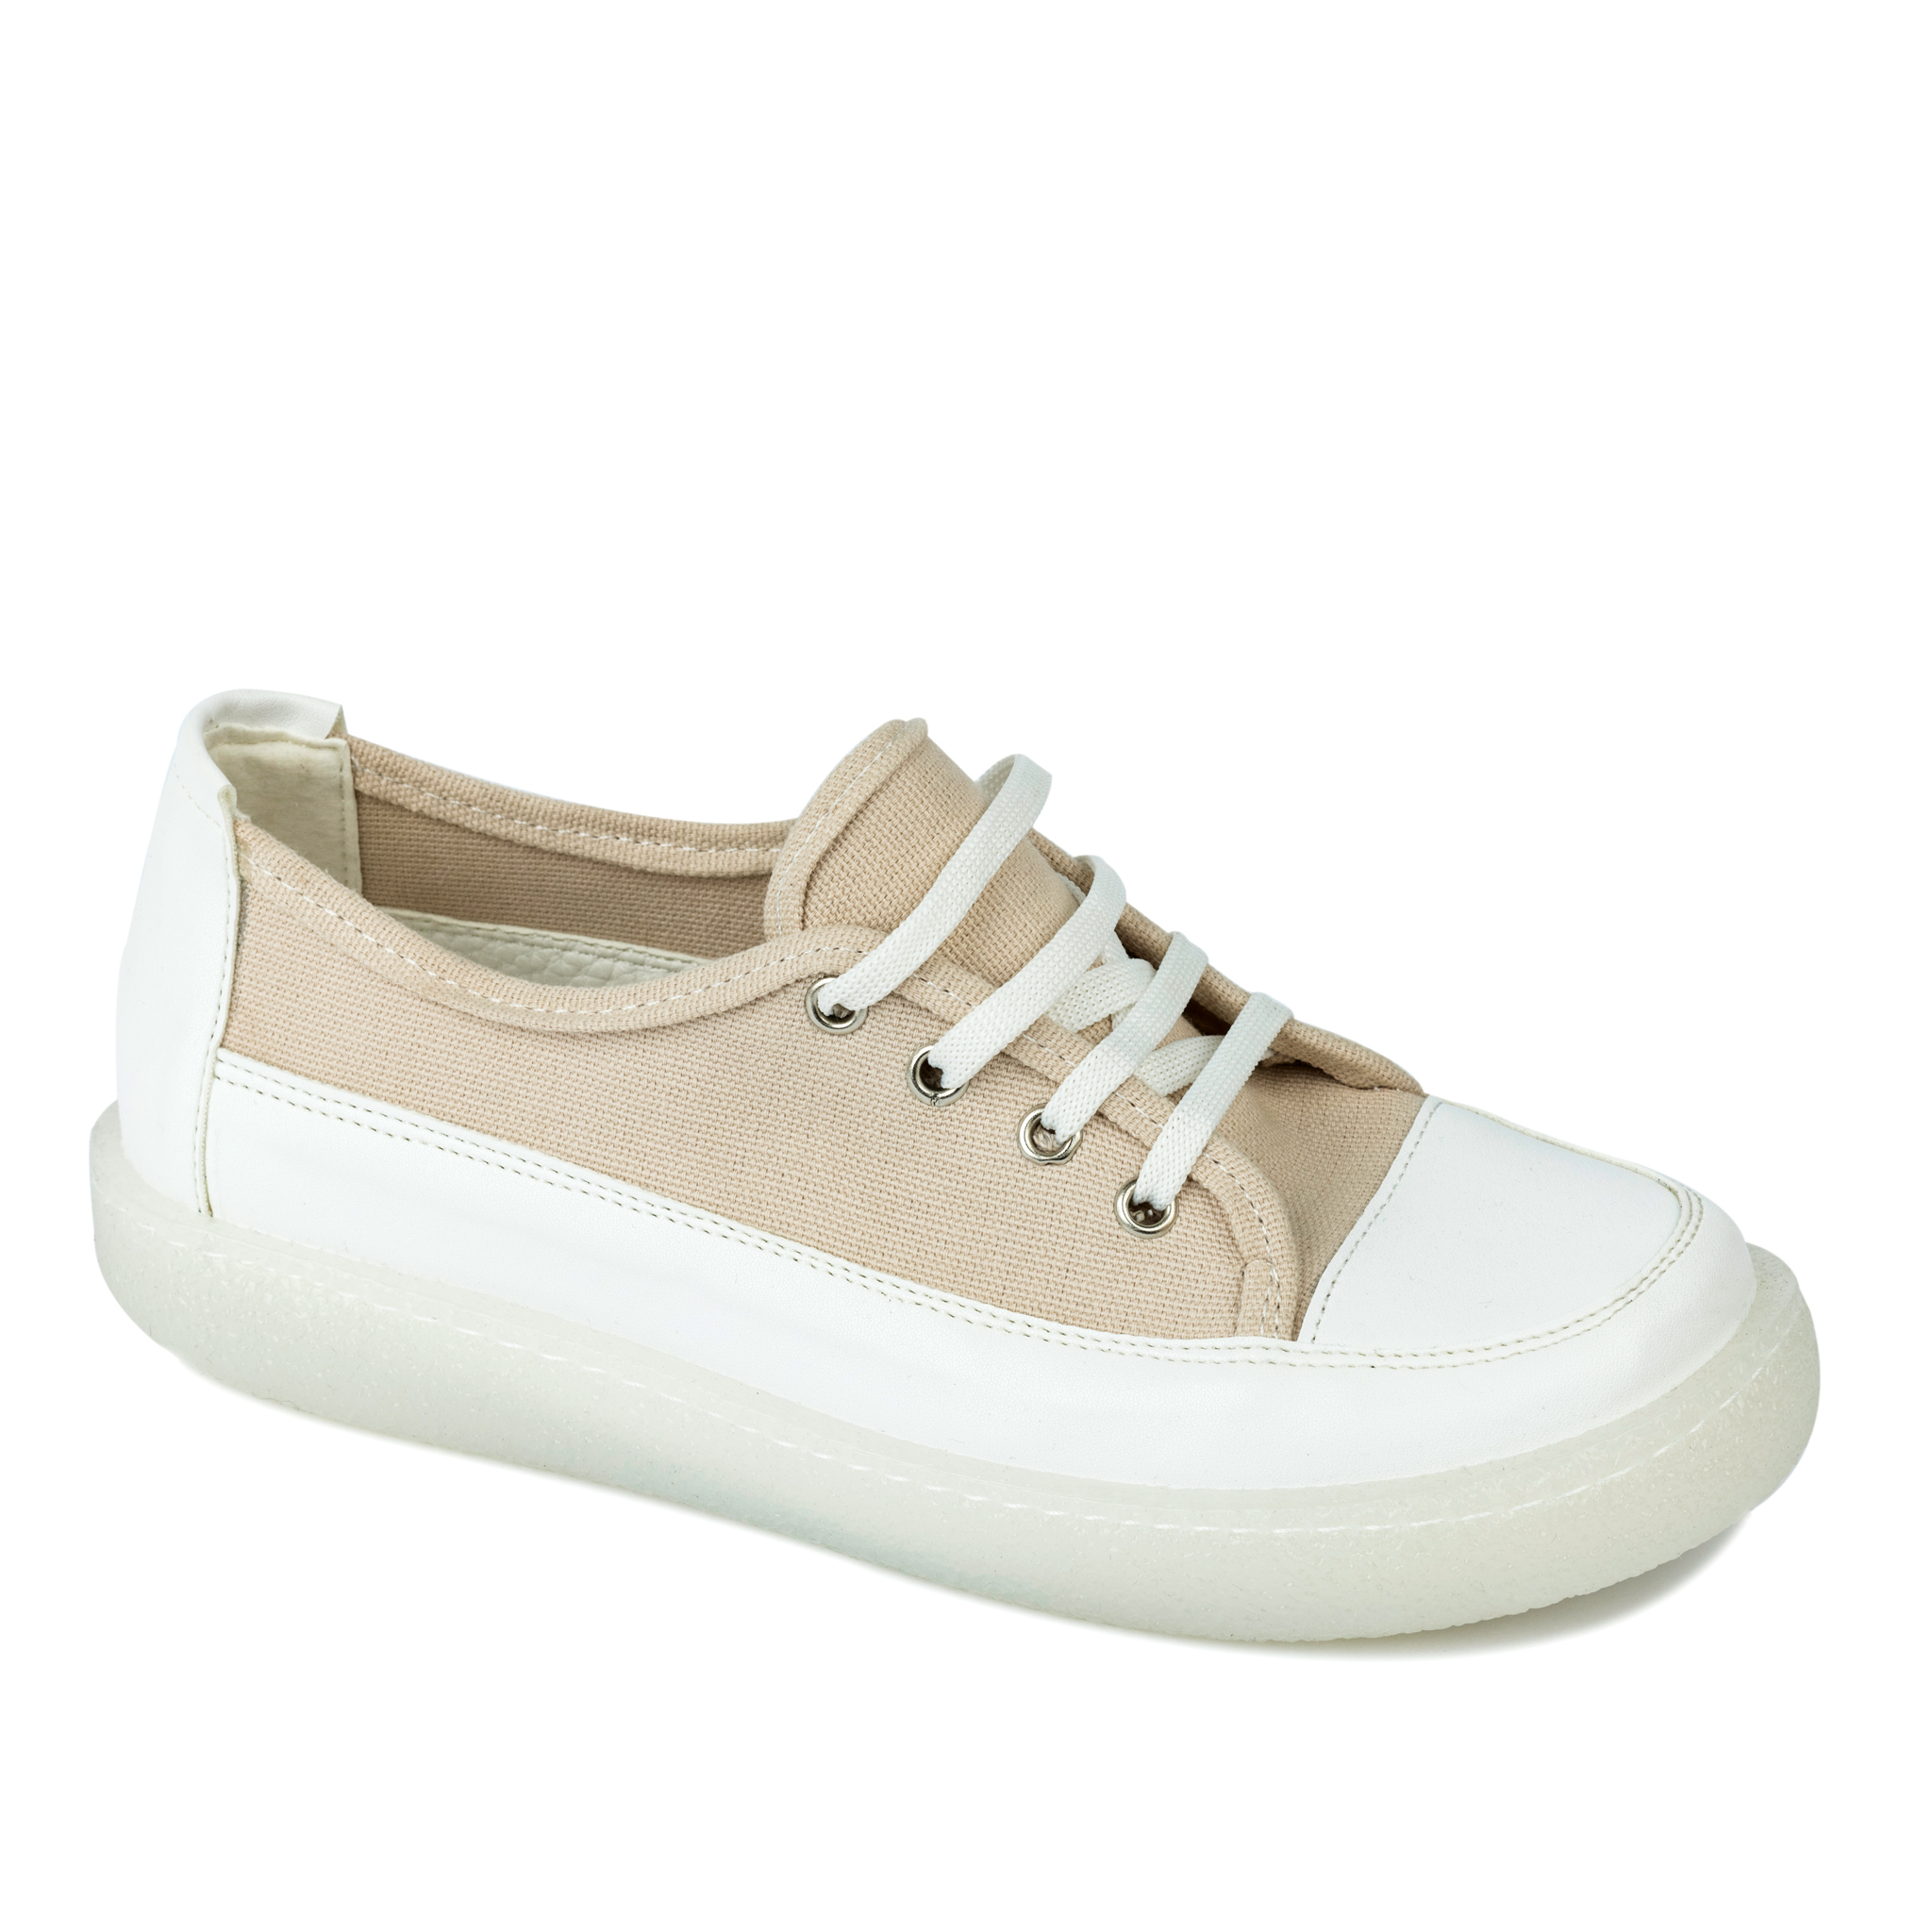 SHALLOW HIGH SOLE SNEAKERS - BEIGE